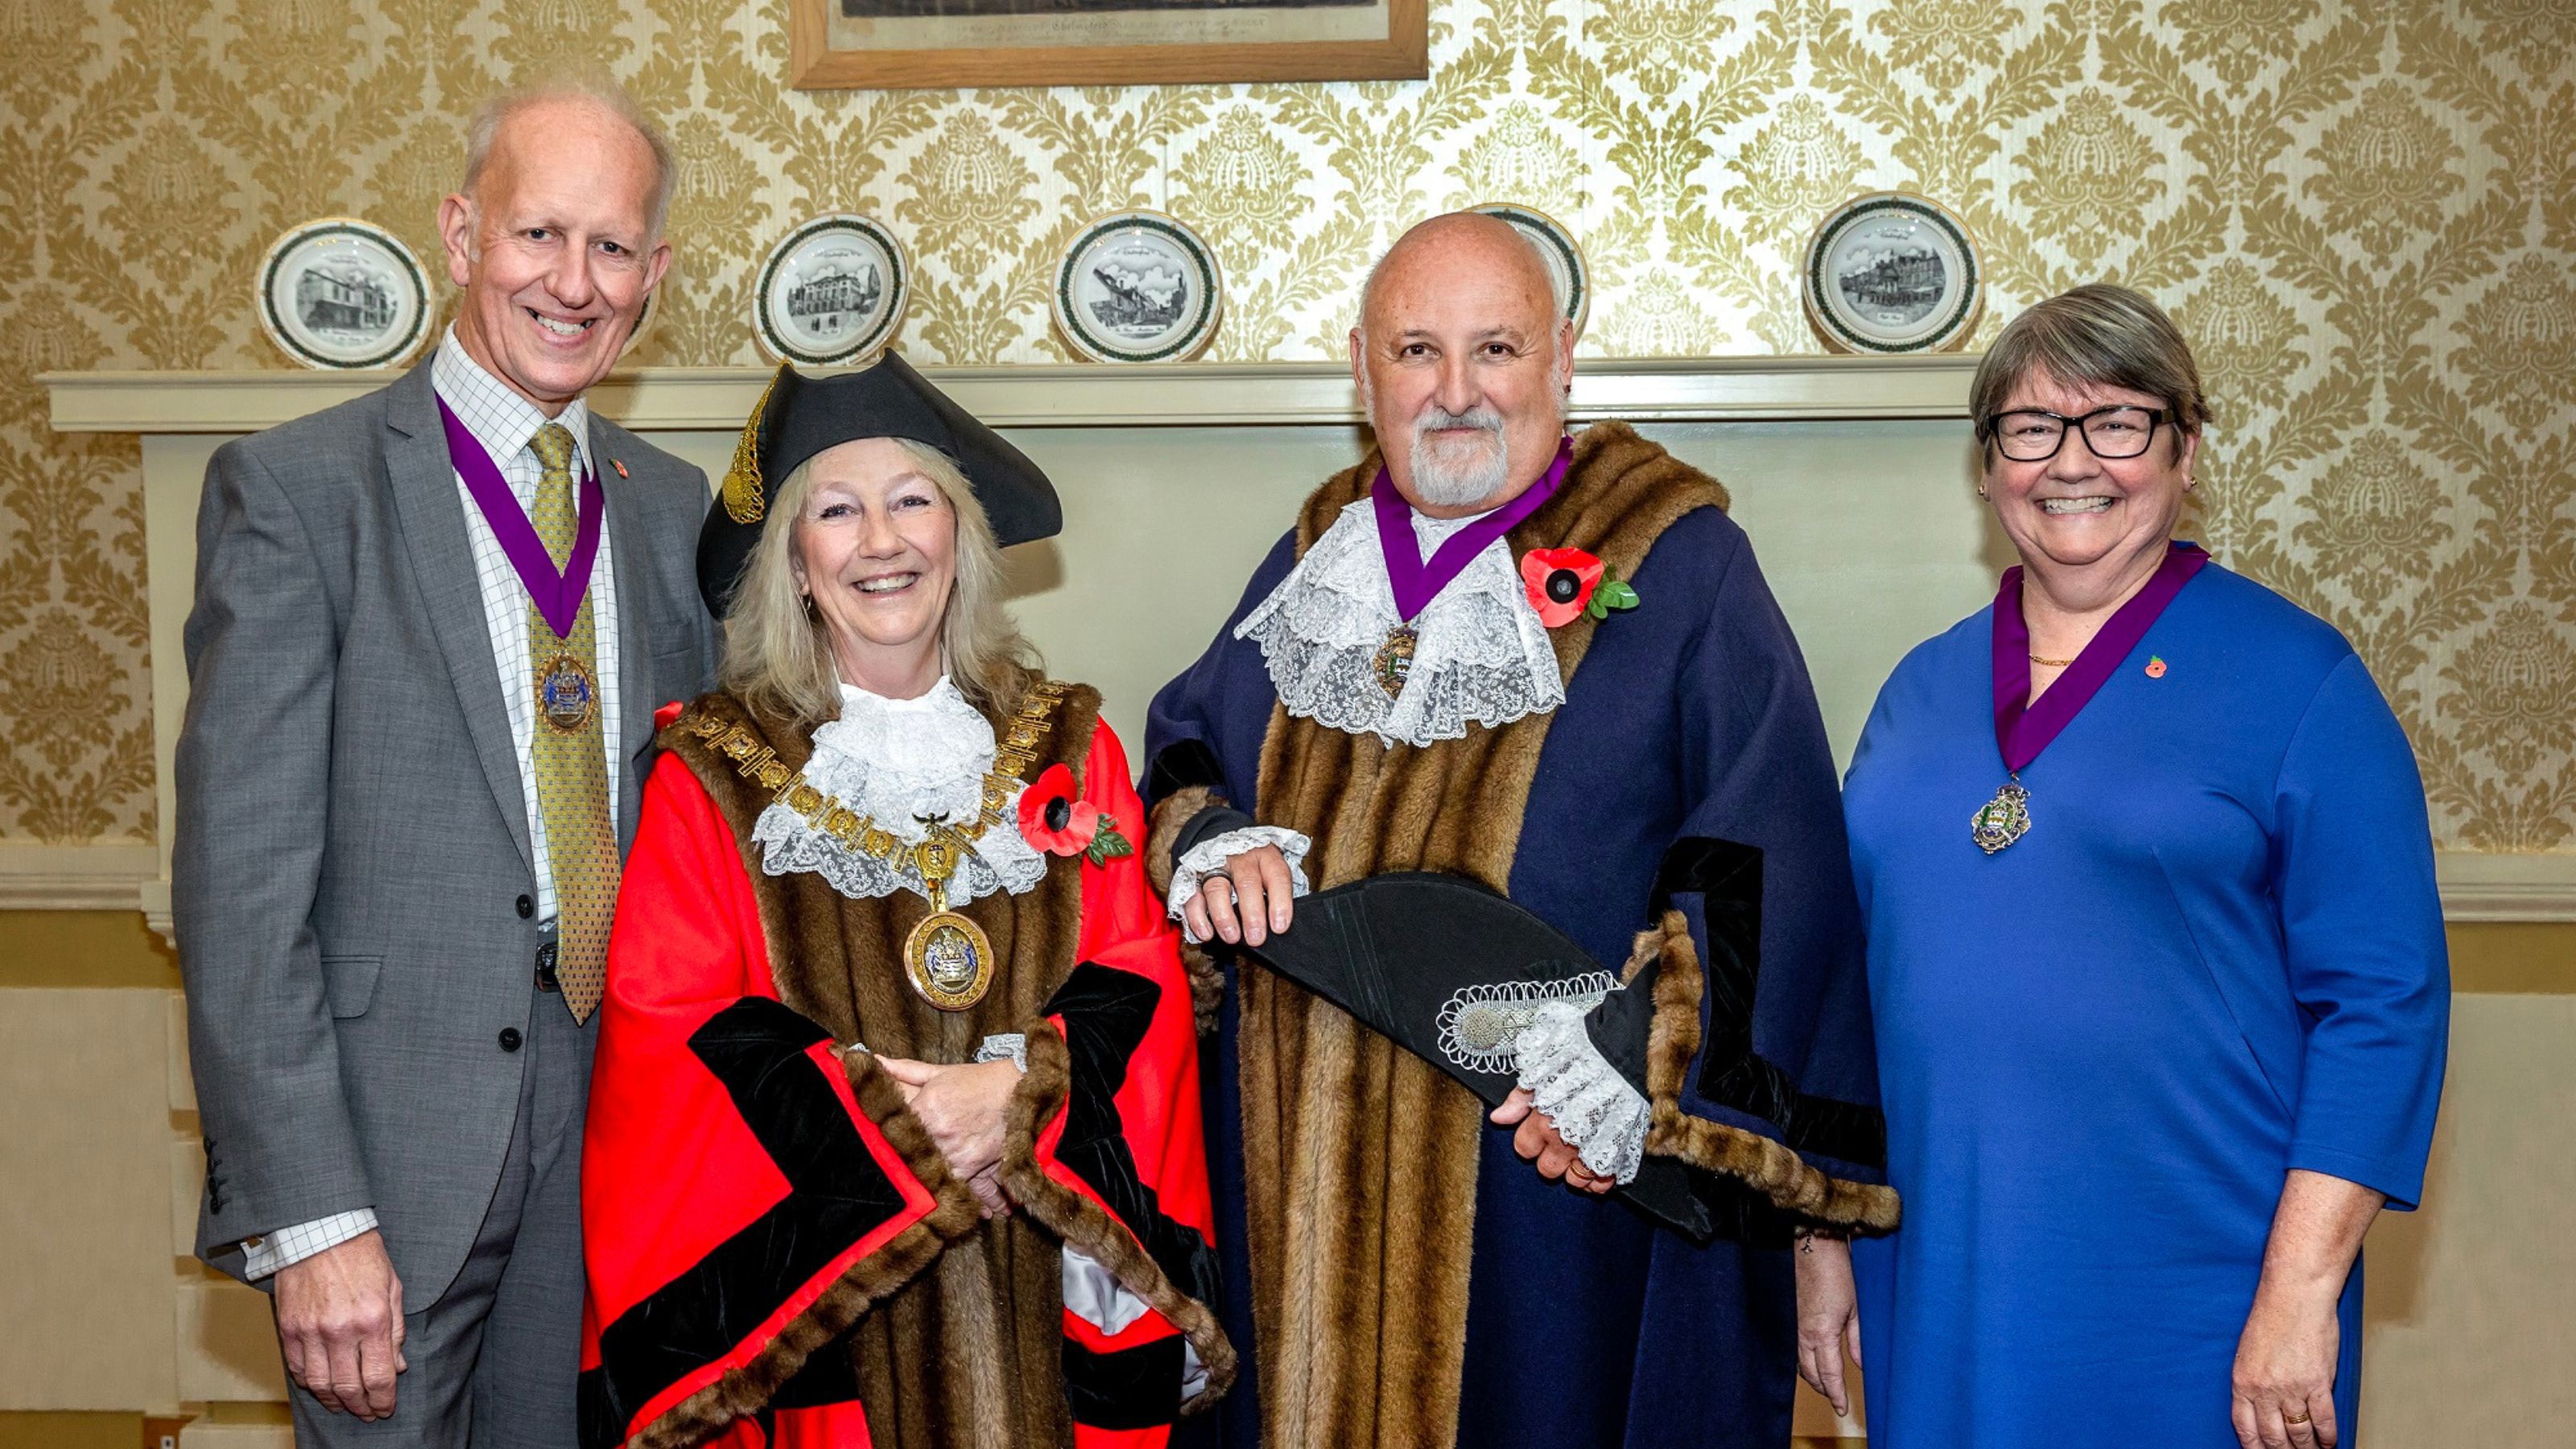 The Mayor Of Chelmsford, Cllr Sue Dobson, And Her Deputy, Cllr Bob Massey Are Pictured With Their Consorts